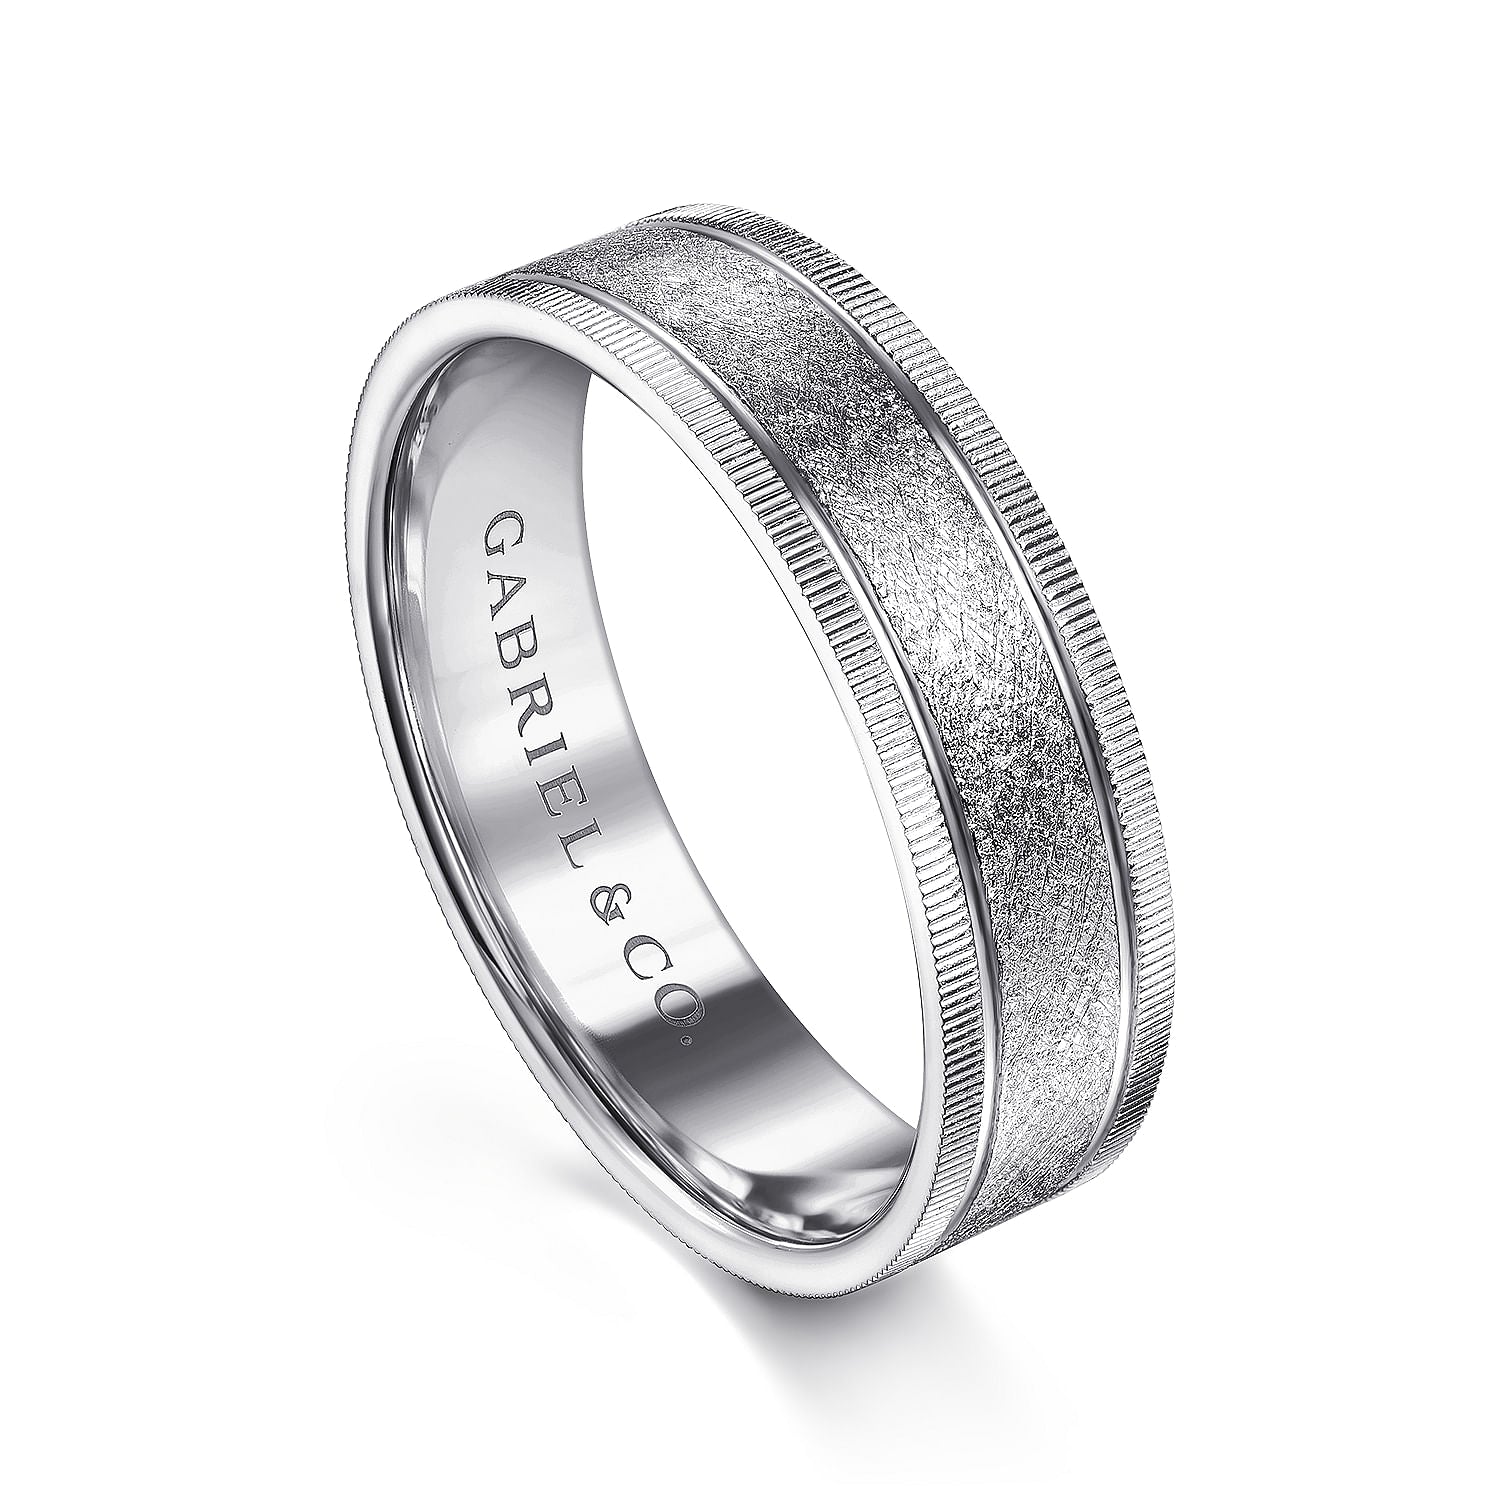 Gabriel & Co White Gold Wedding Band With A Sandblasted Center And Diamond Cut Edges - Gold Wedding Bands - Men's